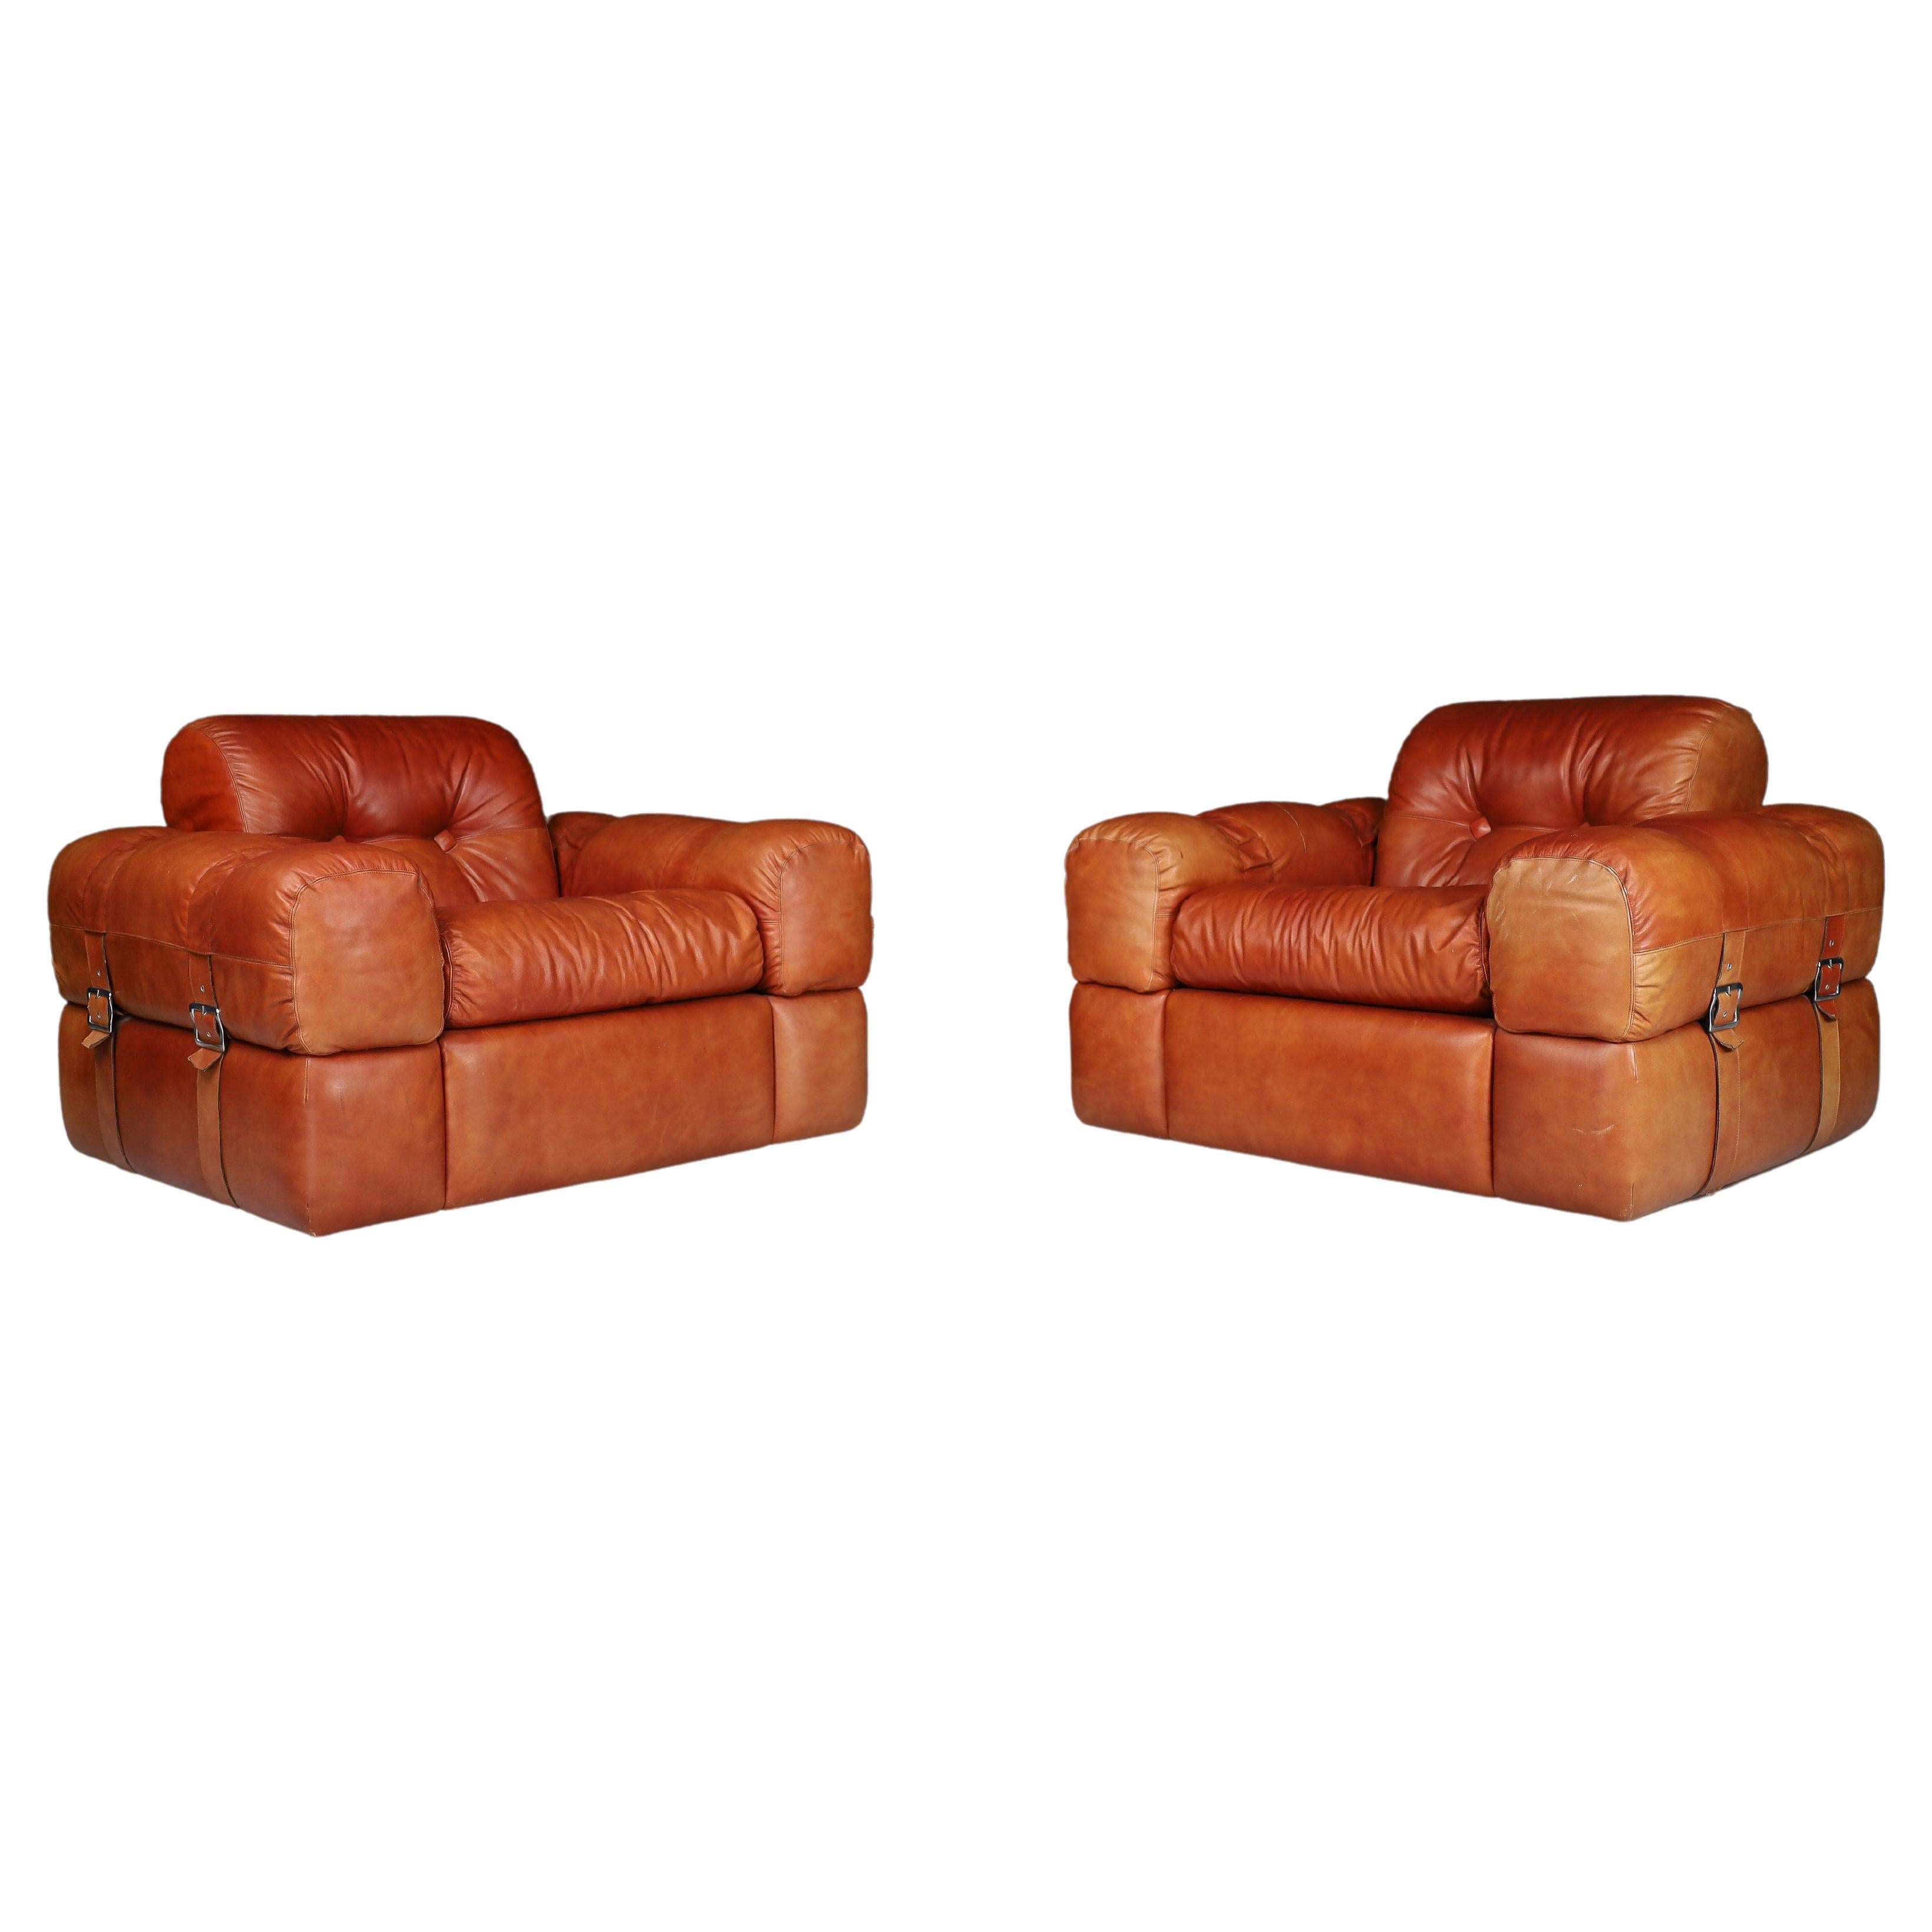 A couple of Lounge Chairs in Patinated Cognac Leather, Italy 1970  